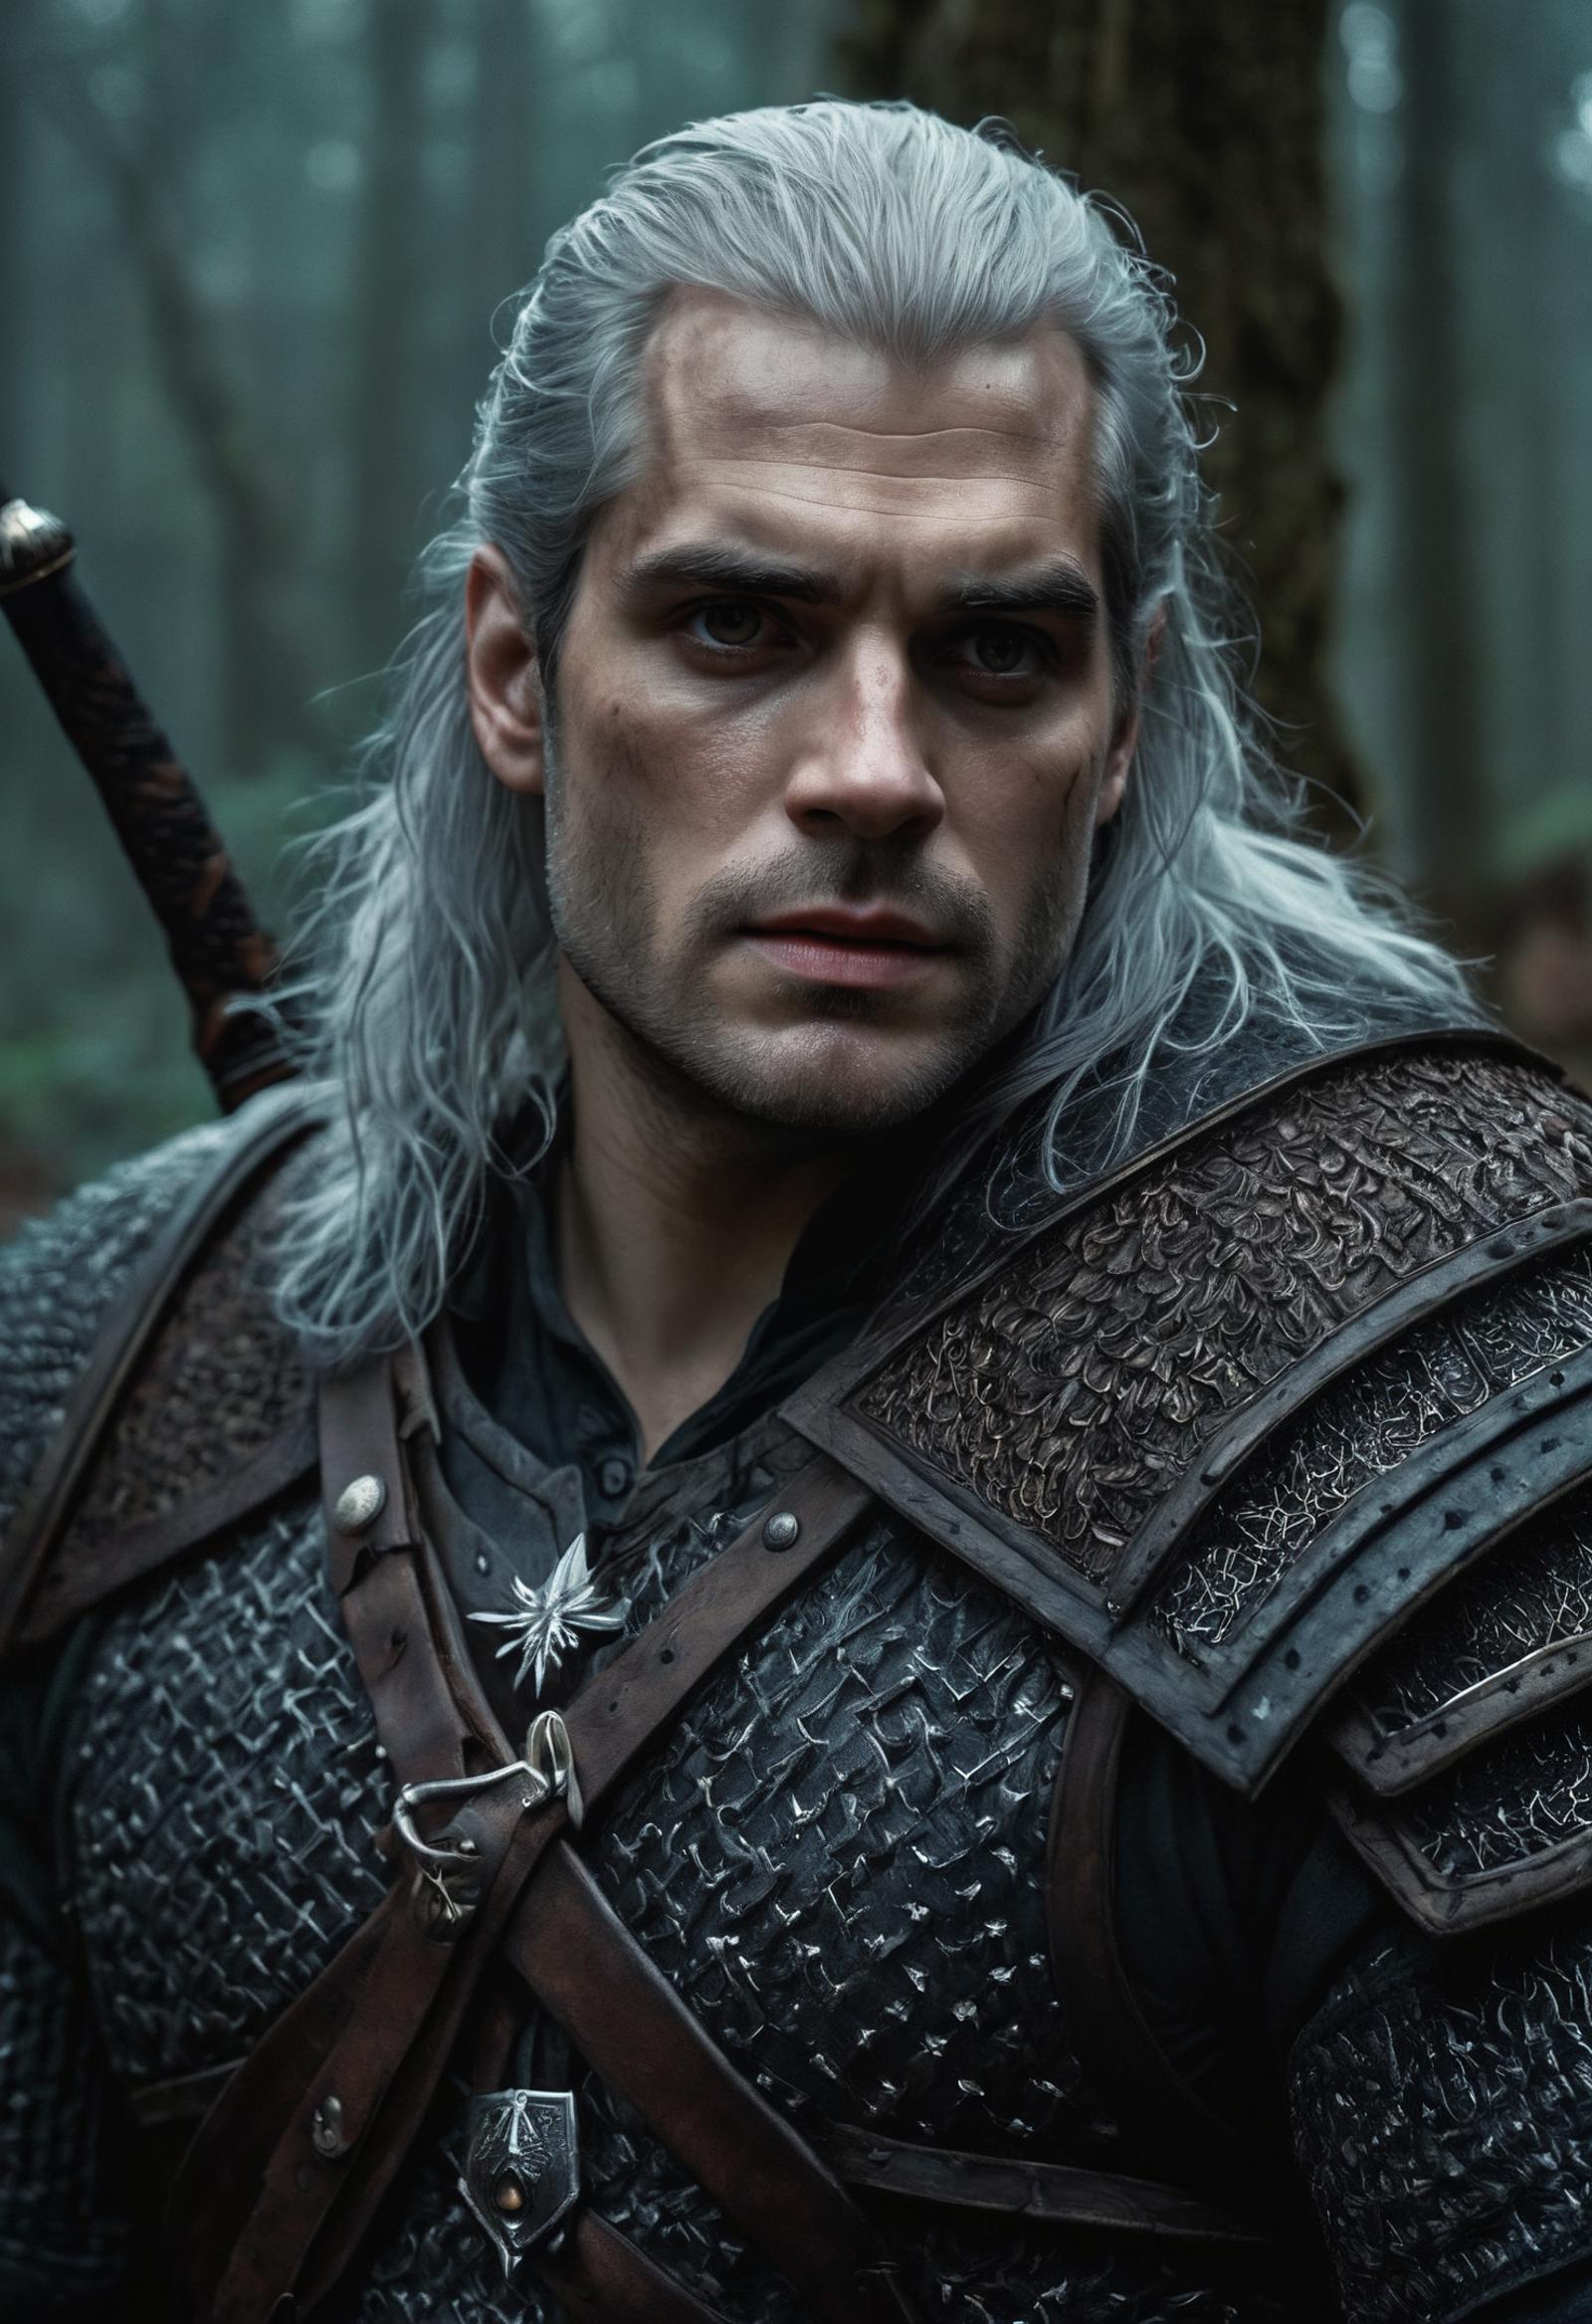 A man with long white hair and a beard wearing a black shirt and a chainmail shirt.